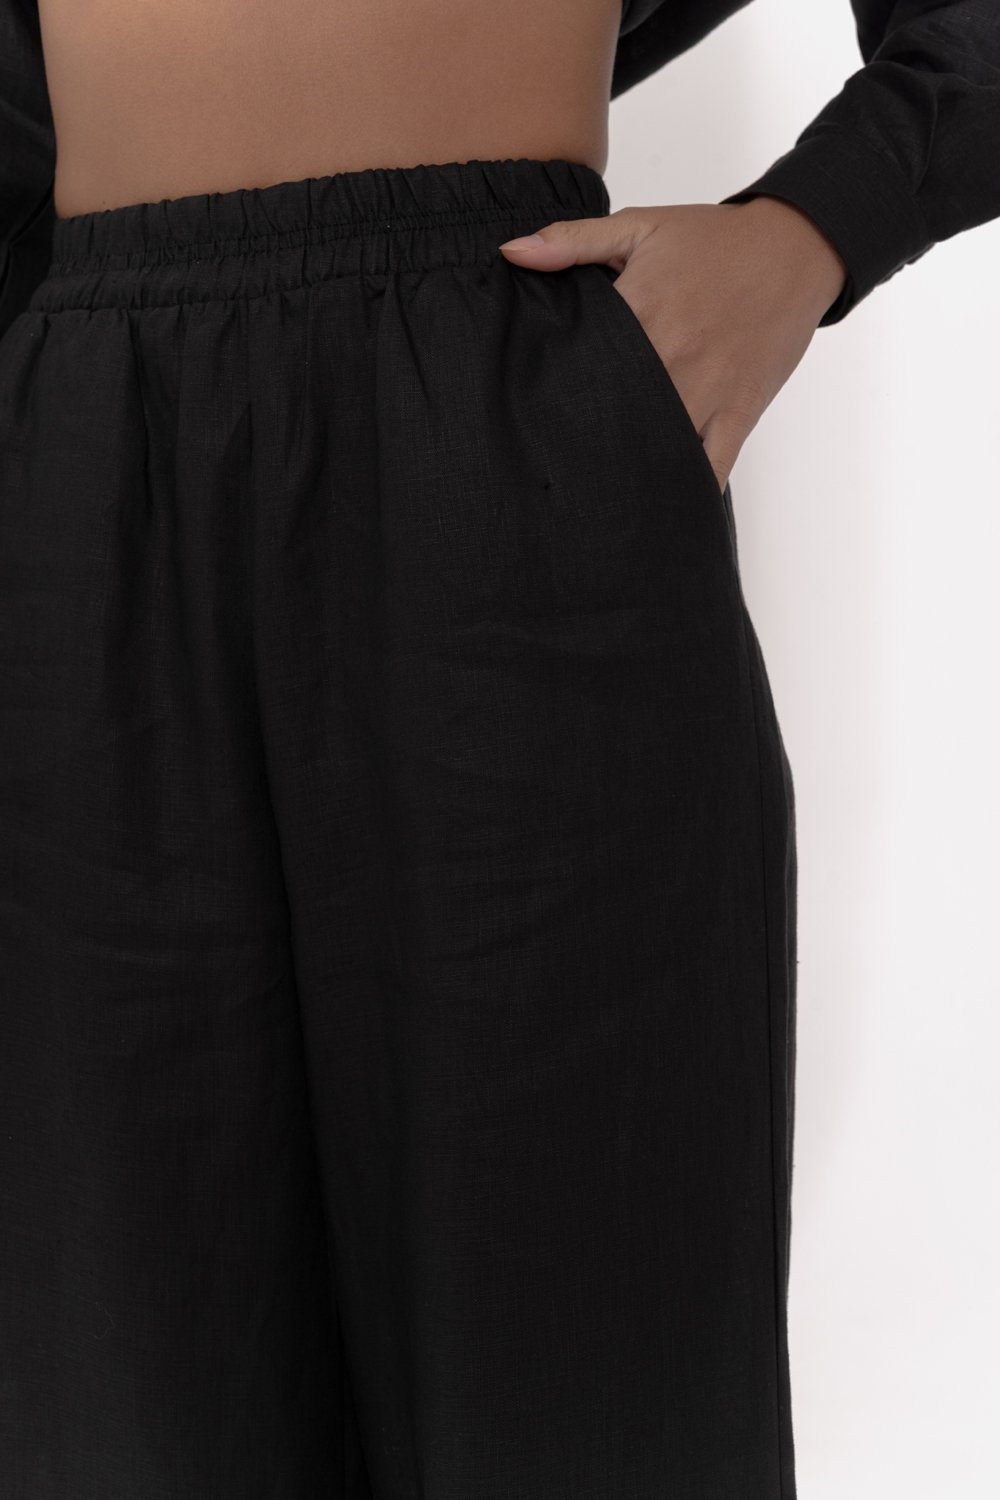 Black linen trousers with elastic waistband